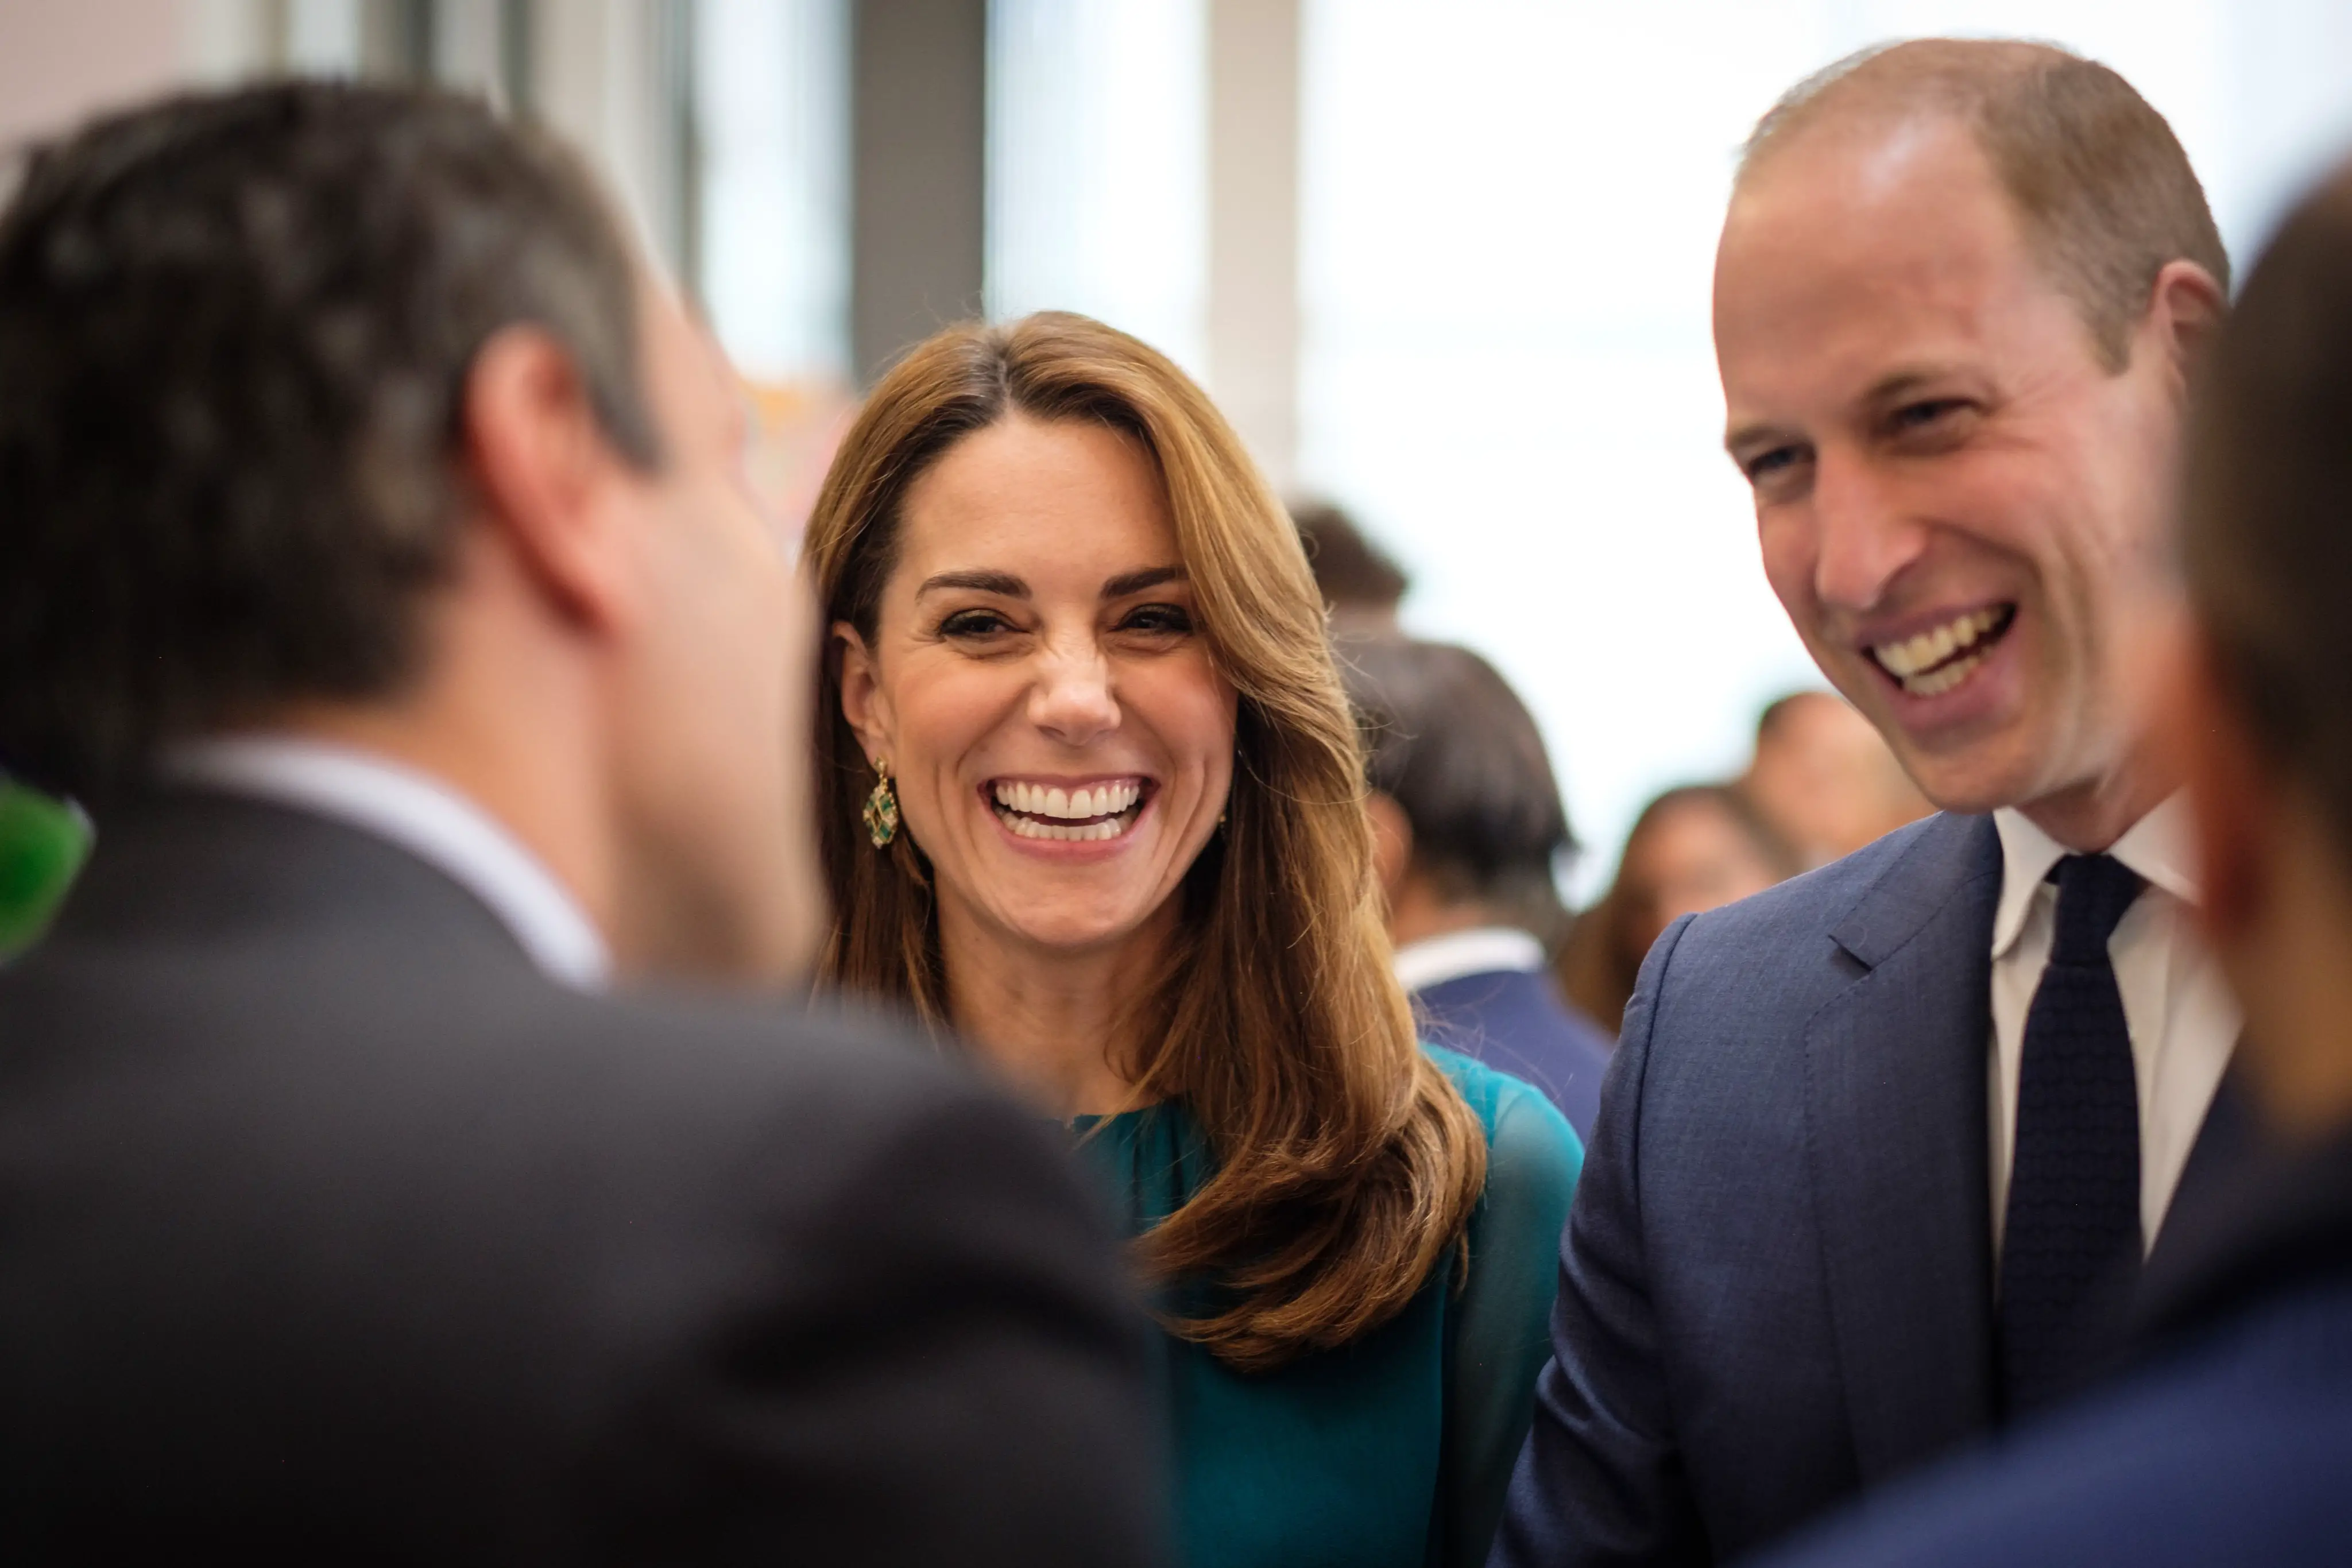 Duke and Duchess of Cambridge attended special event at Aga Khan Center in London ahead of their Pakistan visit